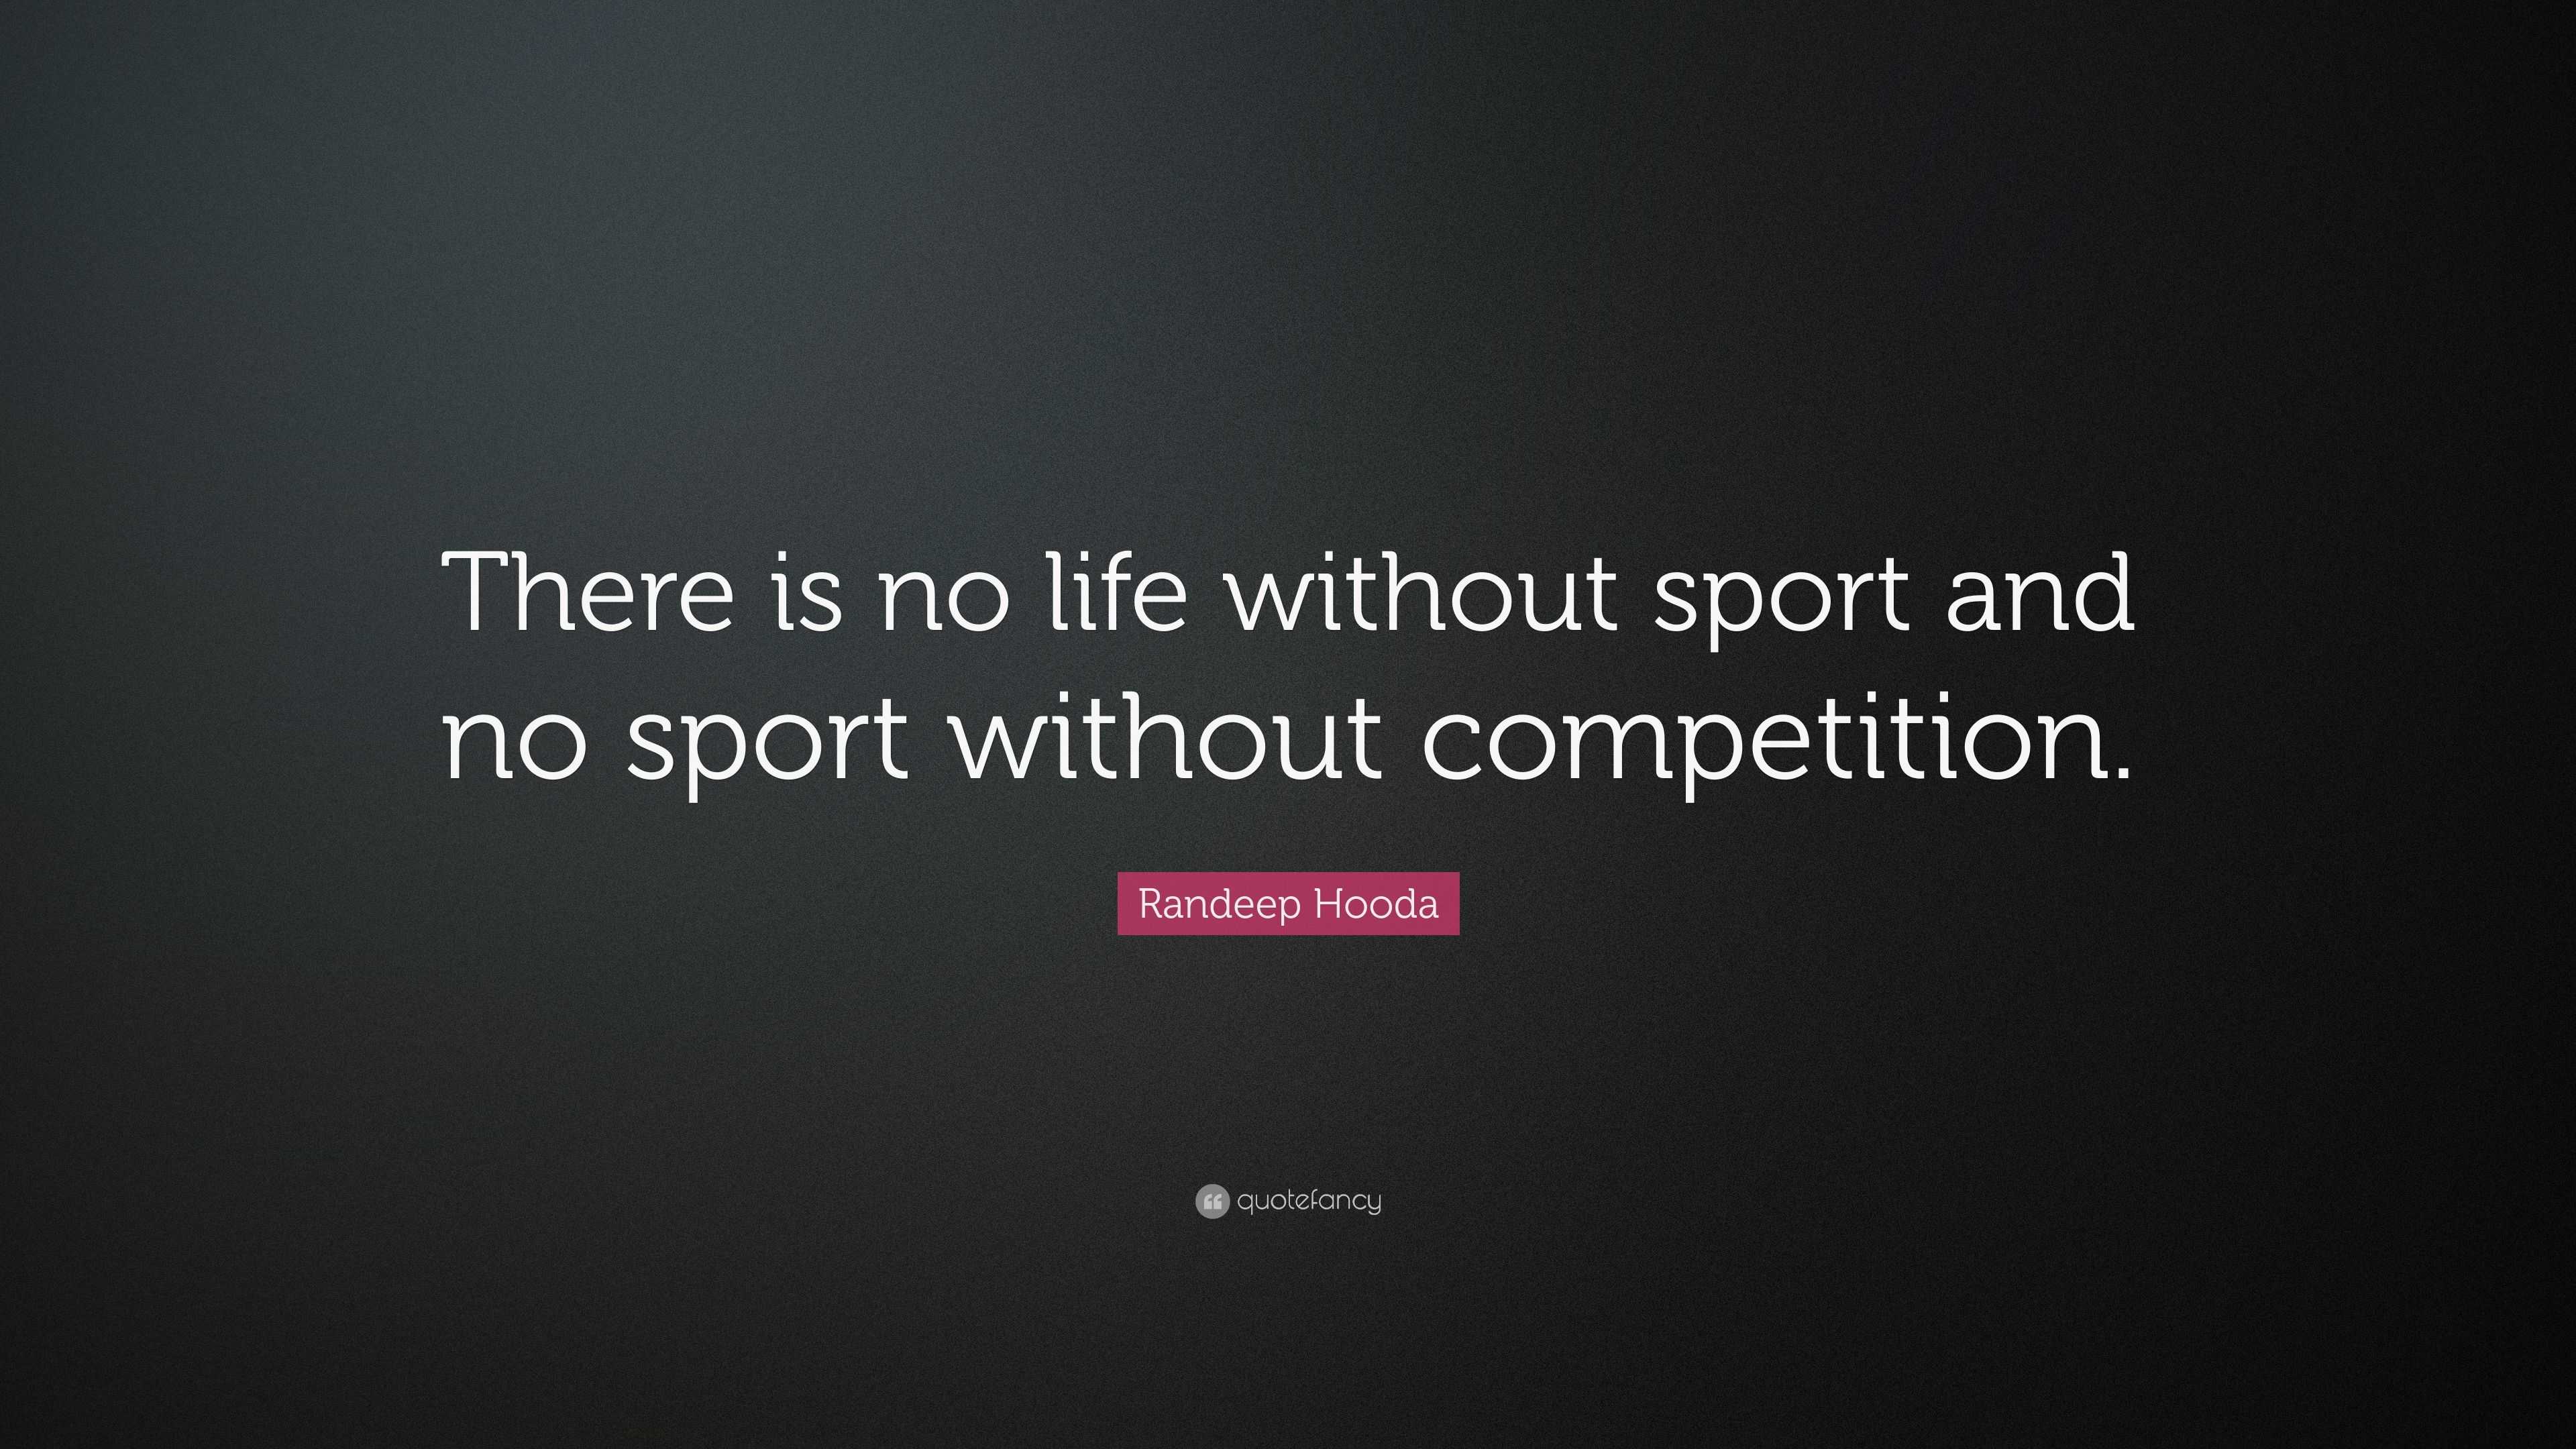 Randeep Hooda Quote: “There is no life without sport and no sport ...